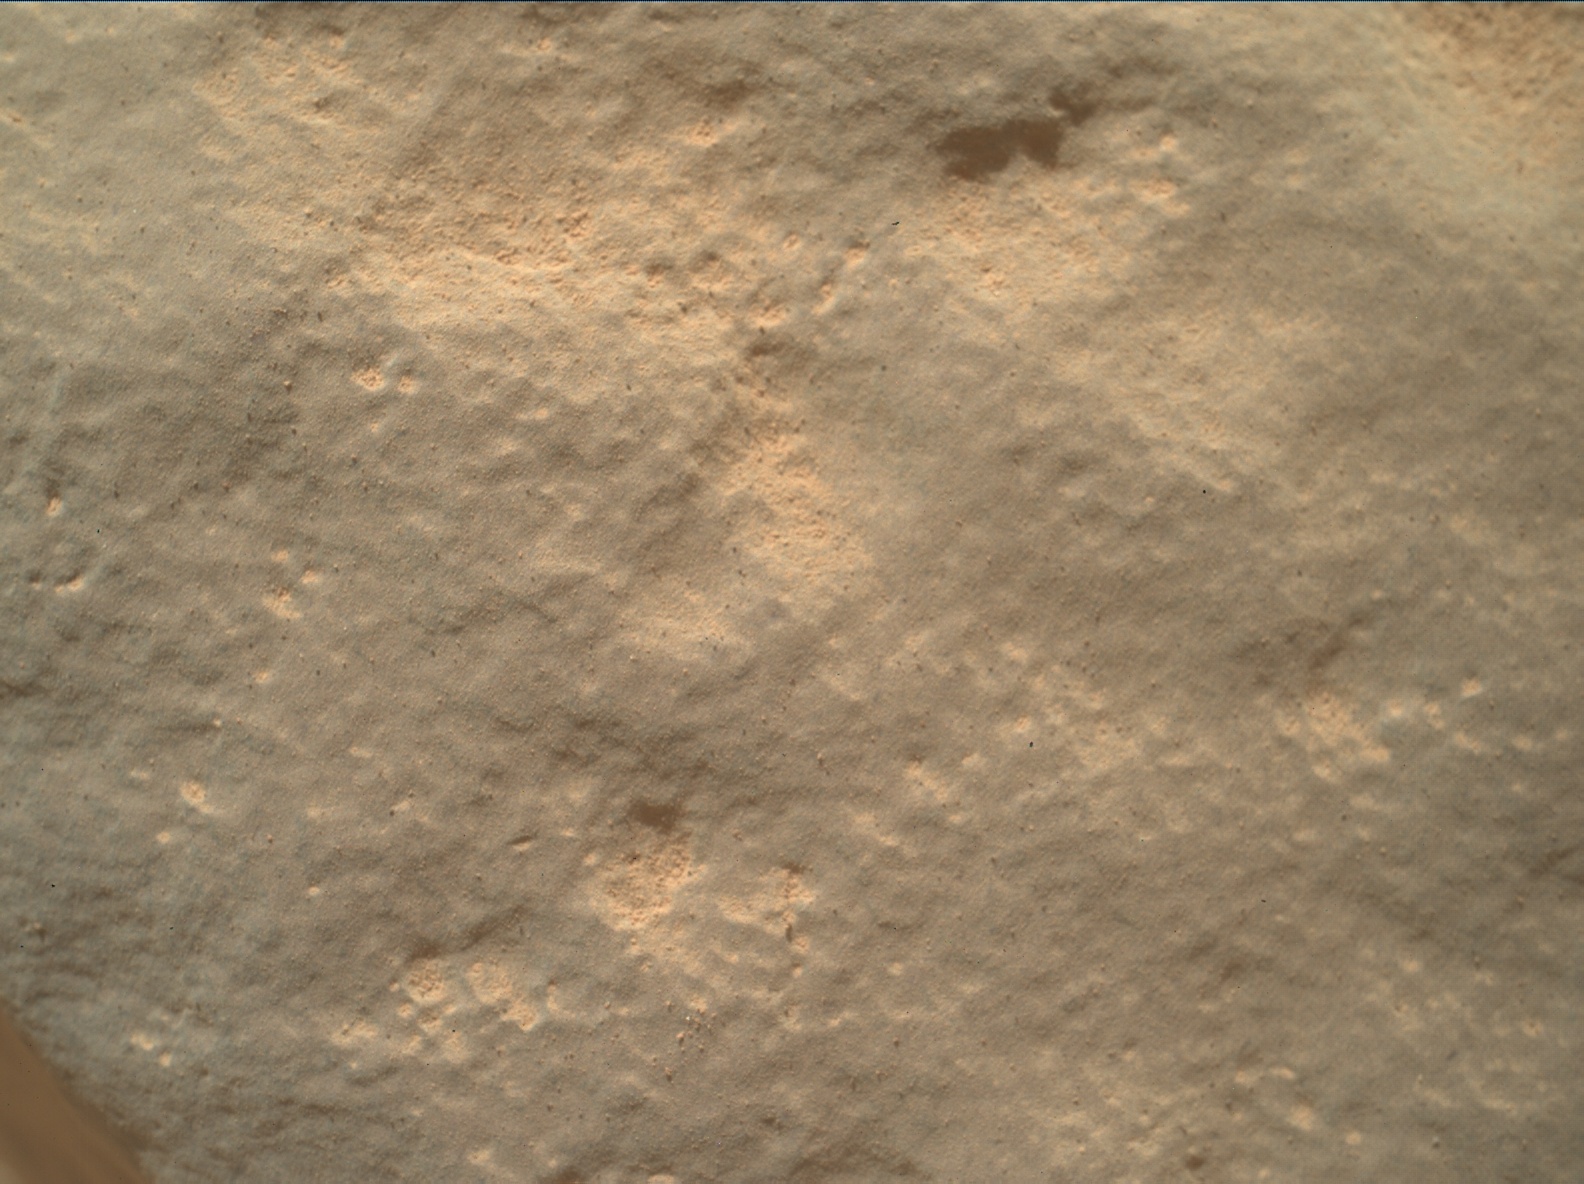 Nasa's Mars rover Curiosity acquired this image using its Mars Hand Lens Imager (MAHLI) on Sol 3769